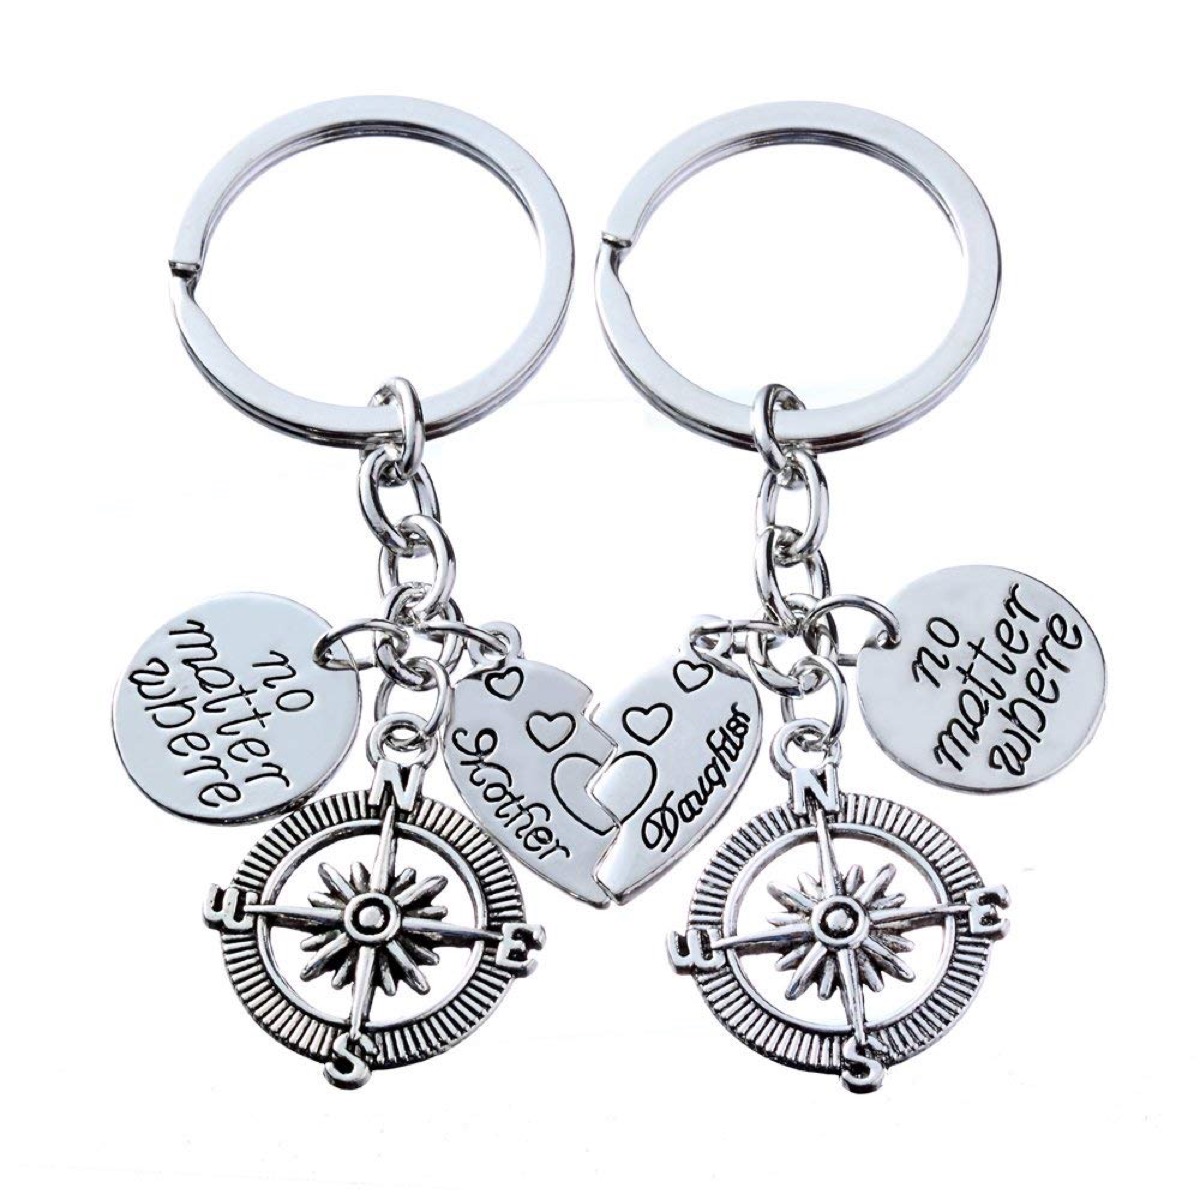 silver keychains with broken hearts and compass charms, mother daughter gifts